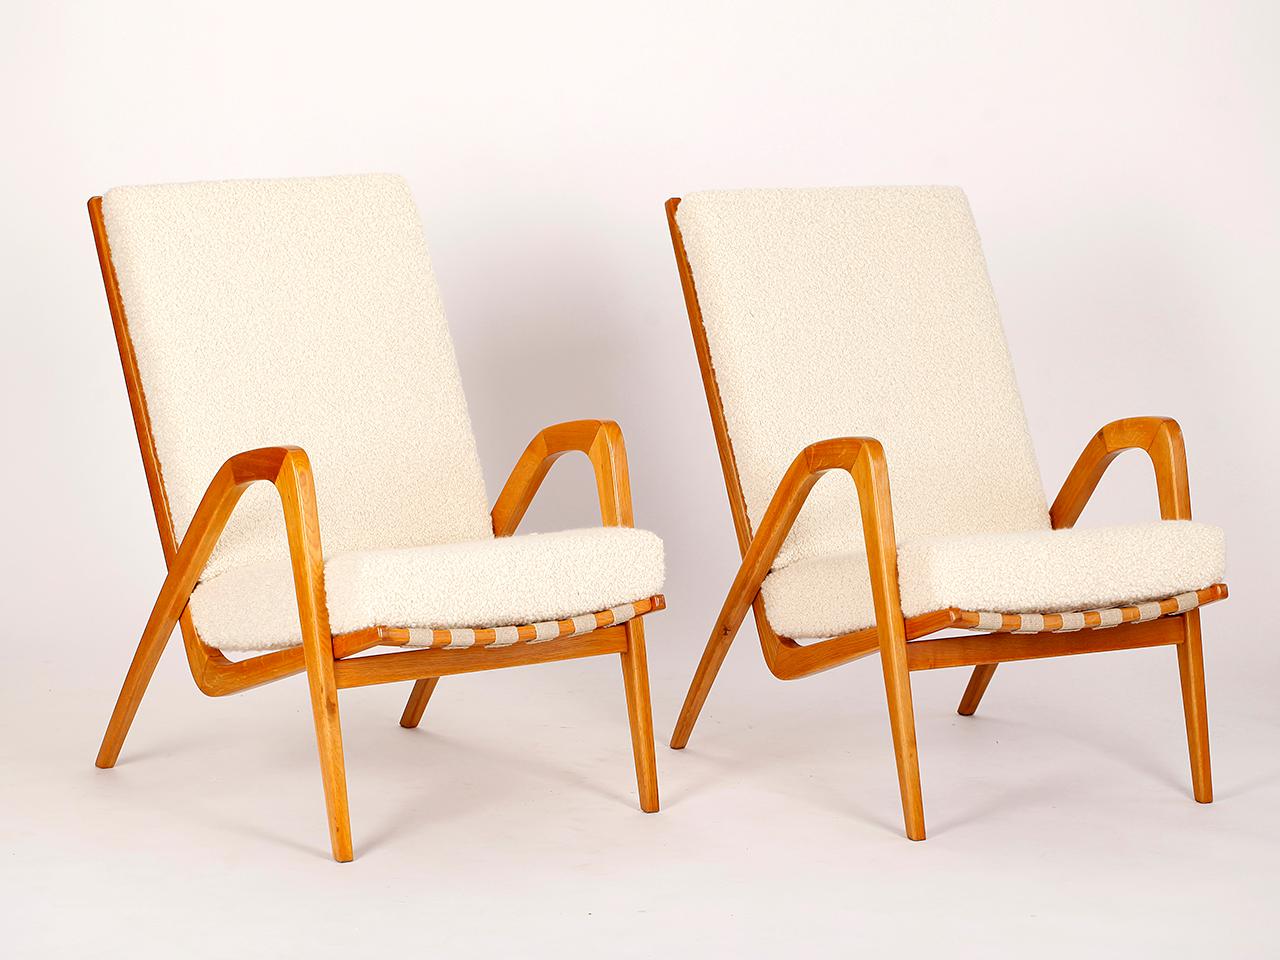 Rare armchairs by Jan Vanek from the 1960s. Newly varnished wooden parts, solid coconut fiber upholstery that complements the hemp straps. Fully restored. With a wonderfully soft cover made of wool and alpaca by the Italian company Dedar. This